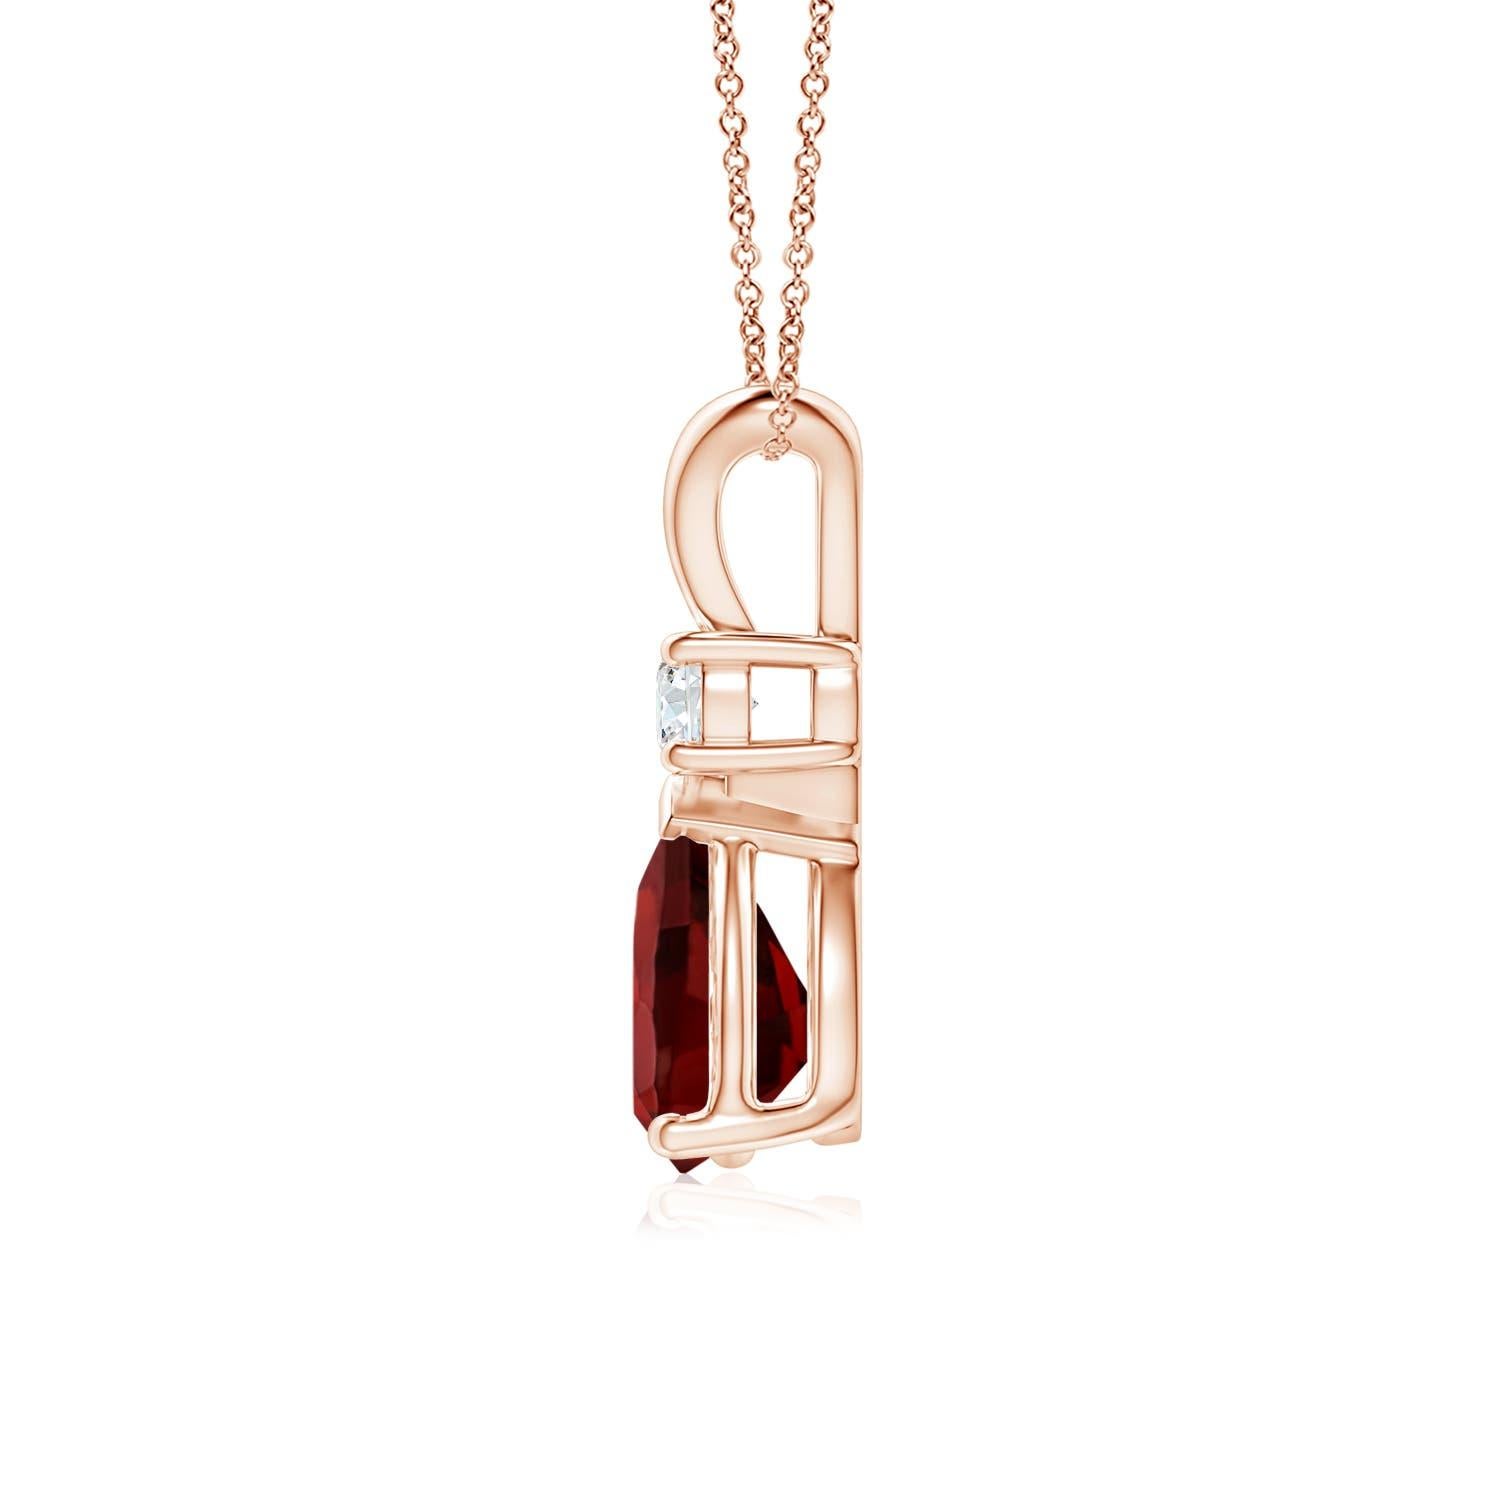 A pear-shaped intense red garnet is secured in a prong setting and embellished with a diamond accent on the top. Simple yet stunning, this teardrop garnet pendant with V bale is sculpted in 14k rose gold.
Garnet is the Birthstone for January and